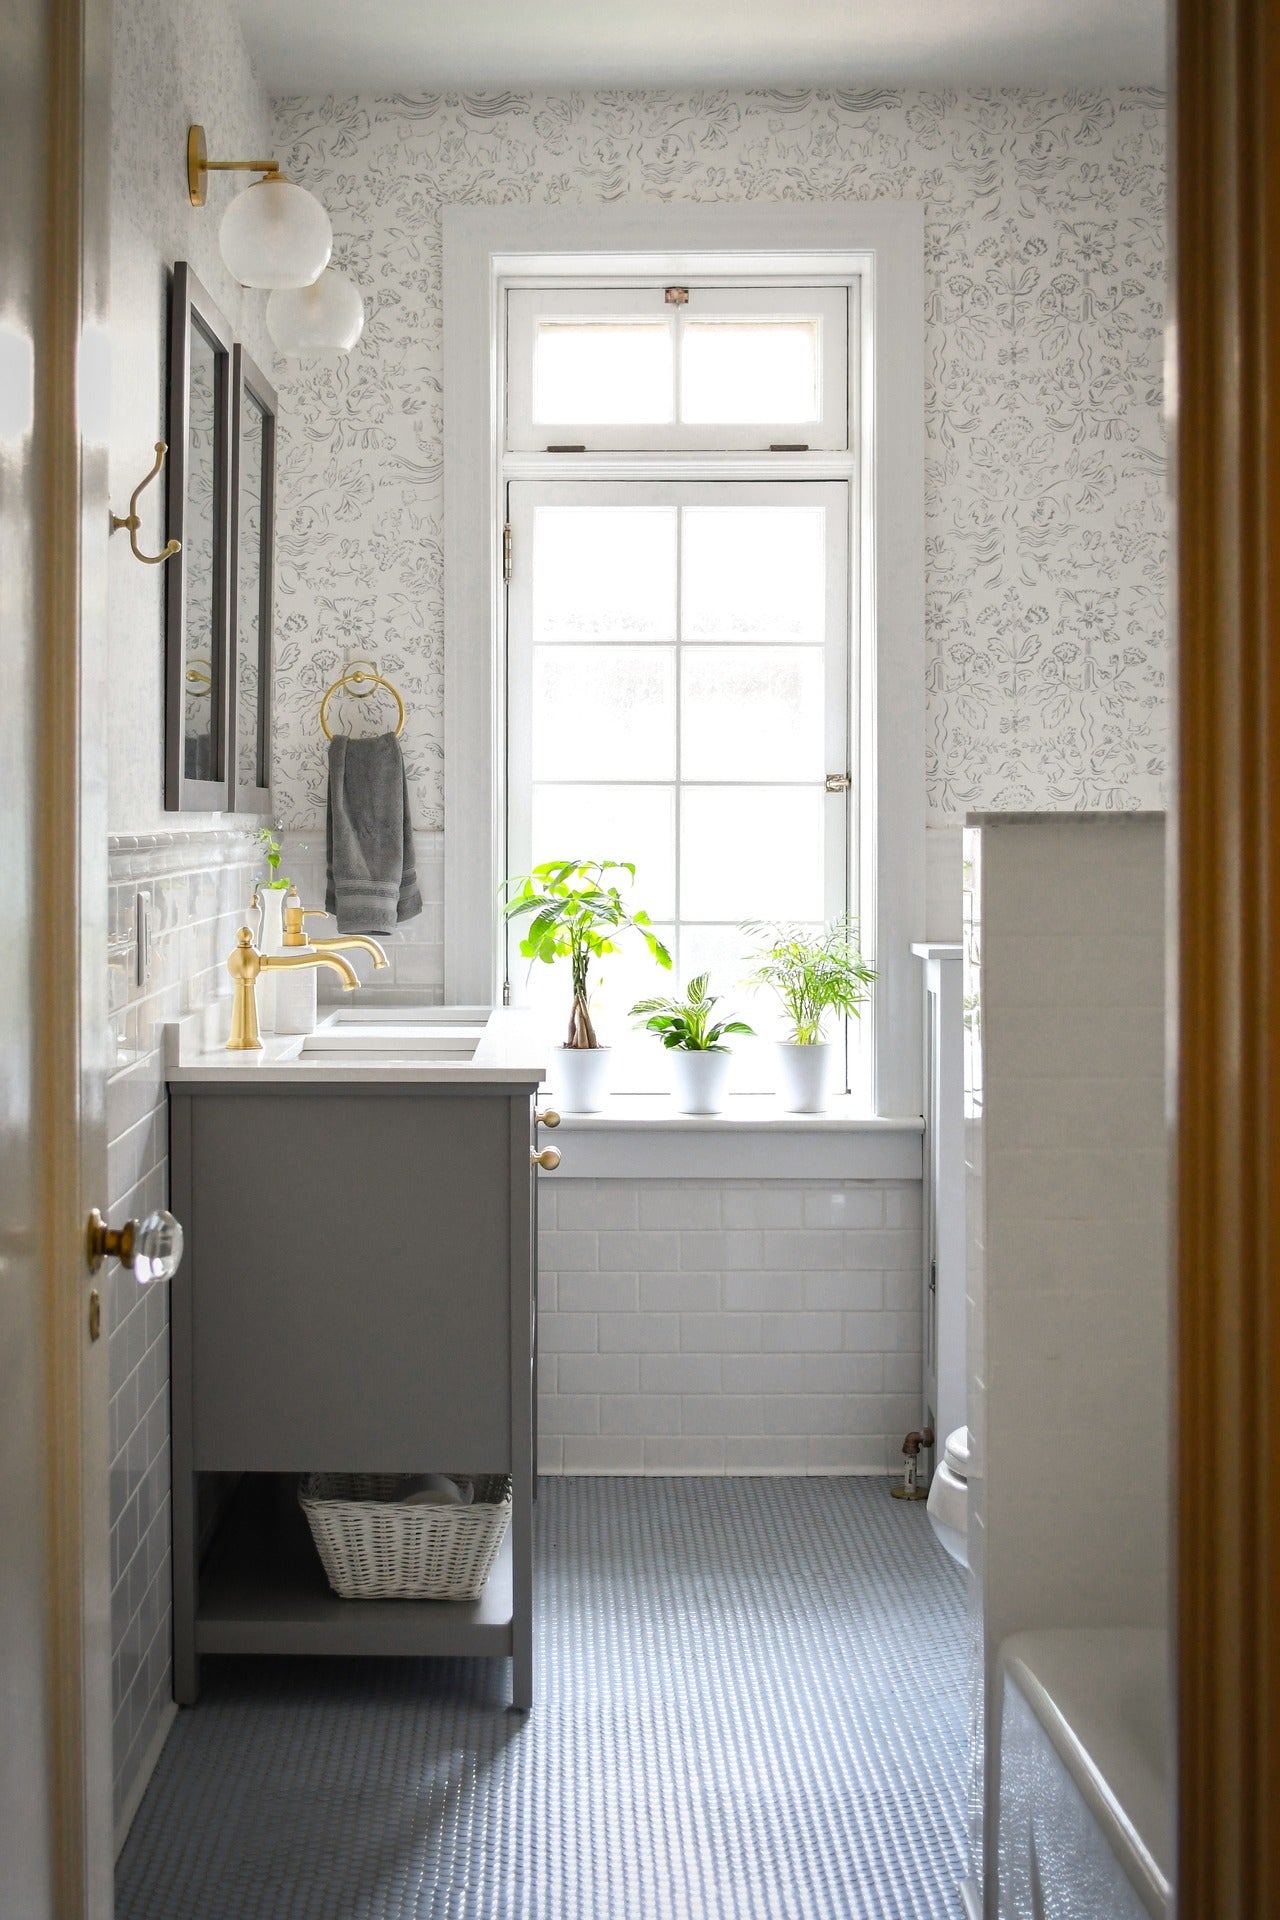 Storyline (White) Wallpaper in a bathroom | Design by Copper and Cotton | Hygge & West